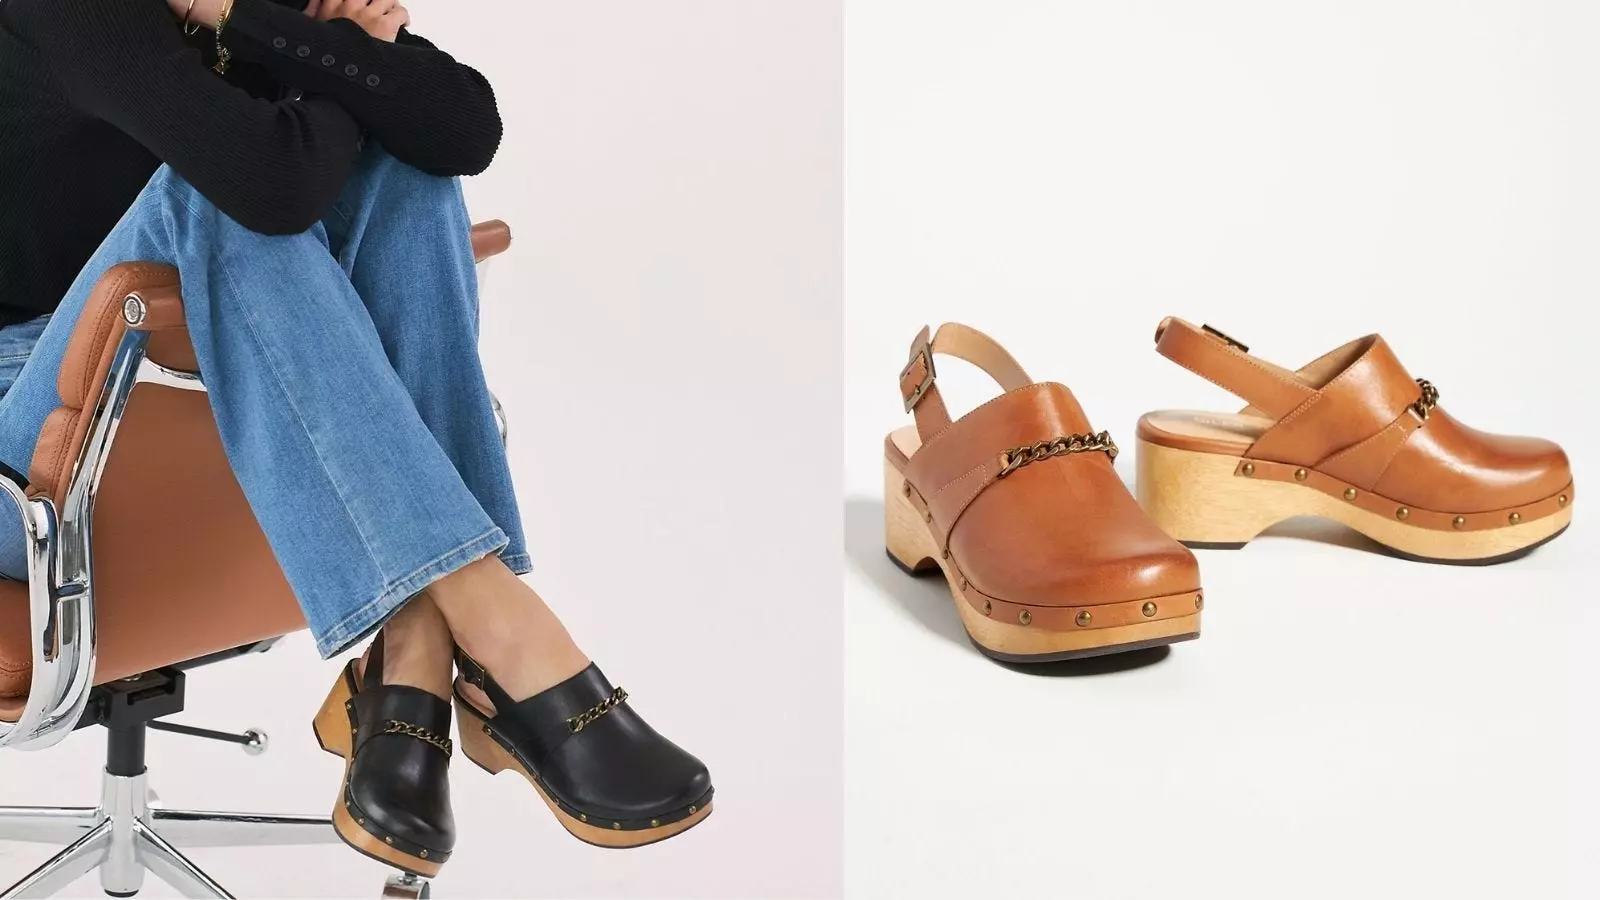 These leather clogs from Anthropologie add a nostalgic look to your fall wardrobe.